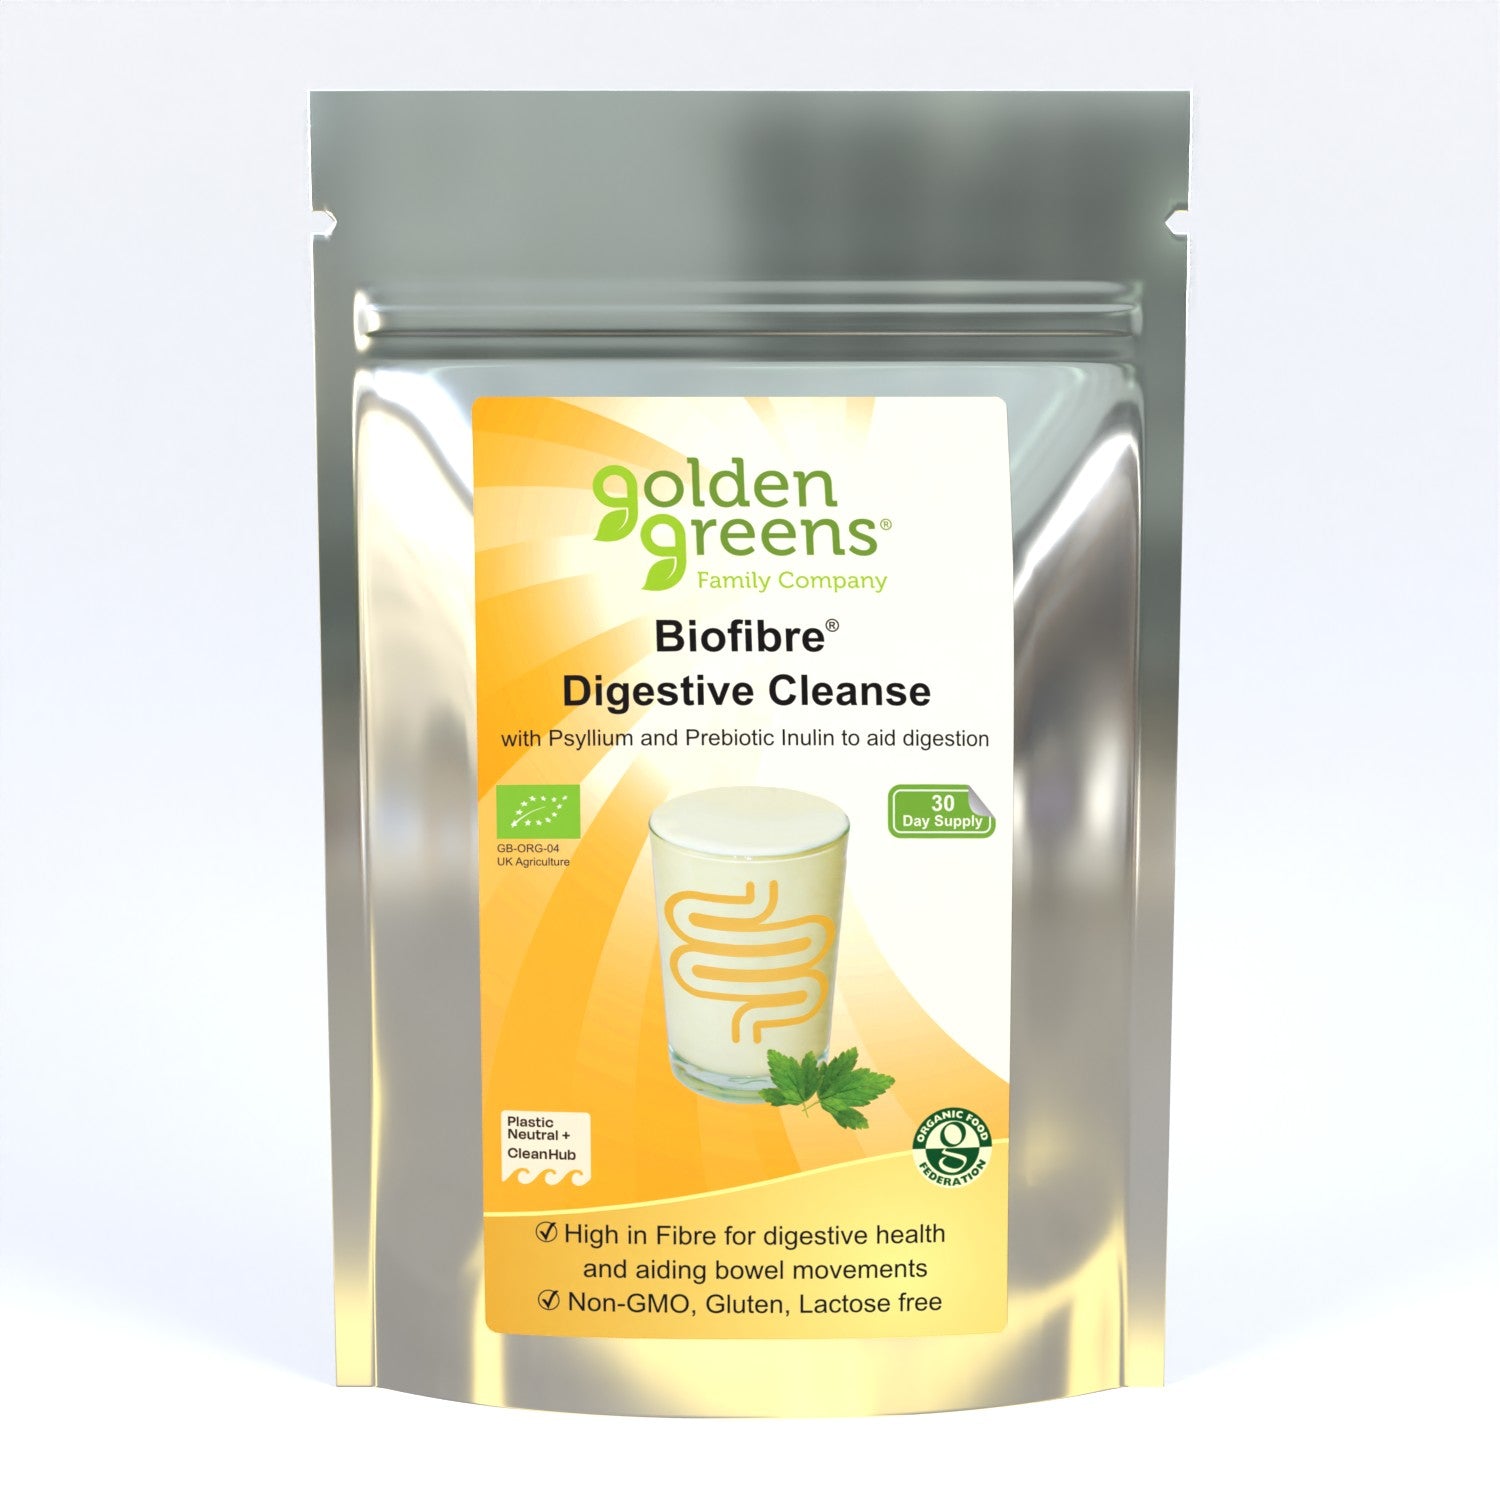 View Biofibre Organic Digestive Cleanse information